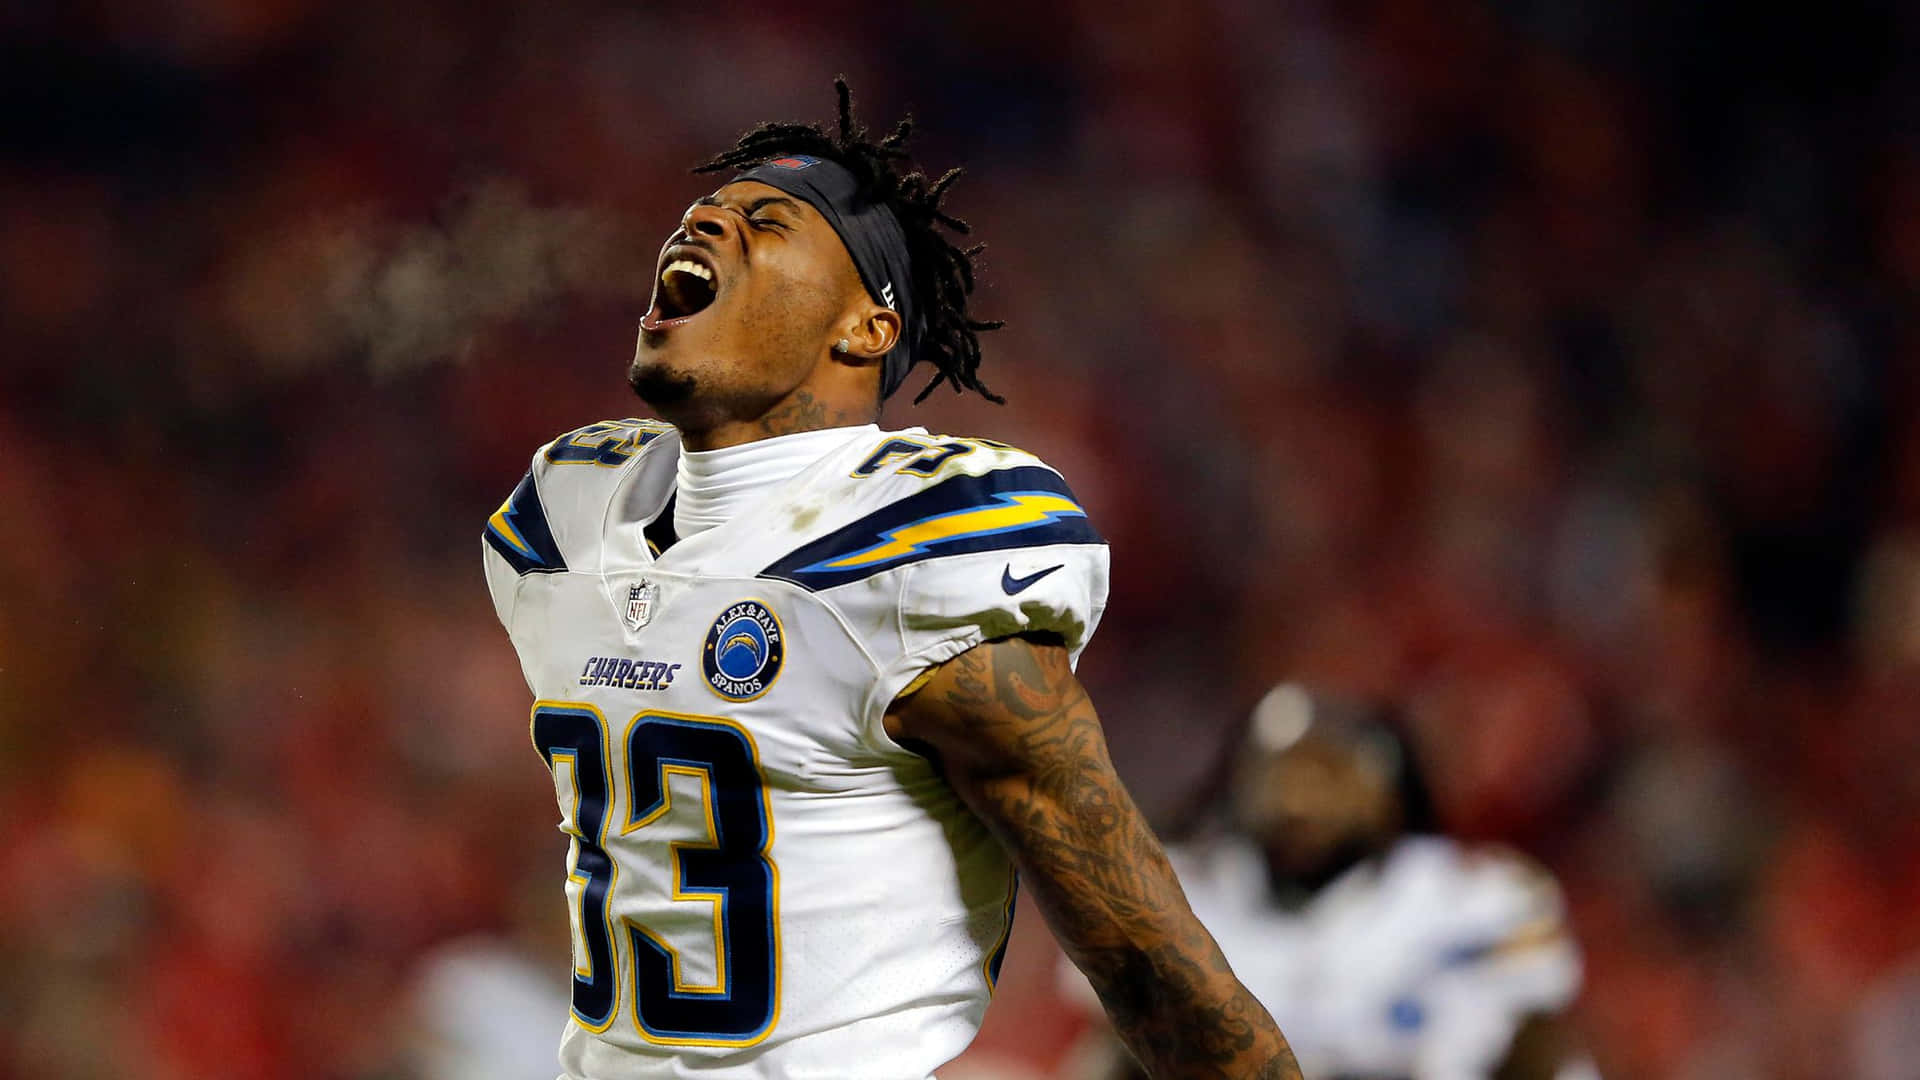 Derwin James Los Angeles Chargers Football Player Wallpaper